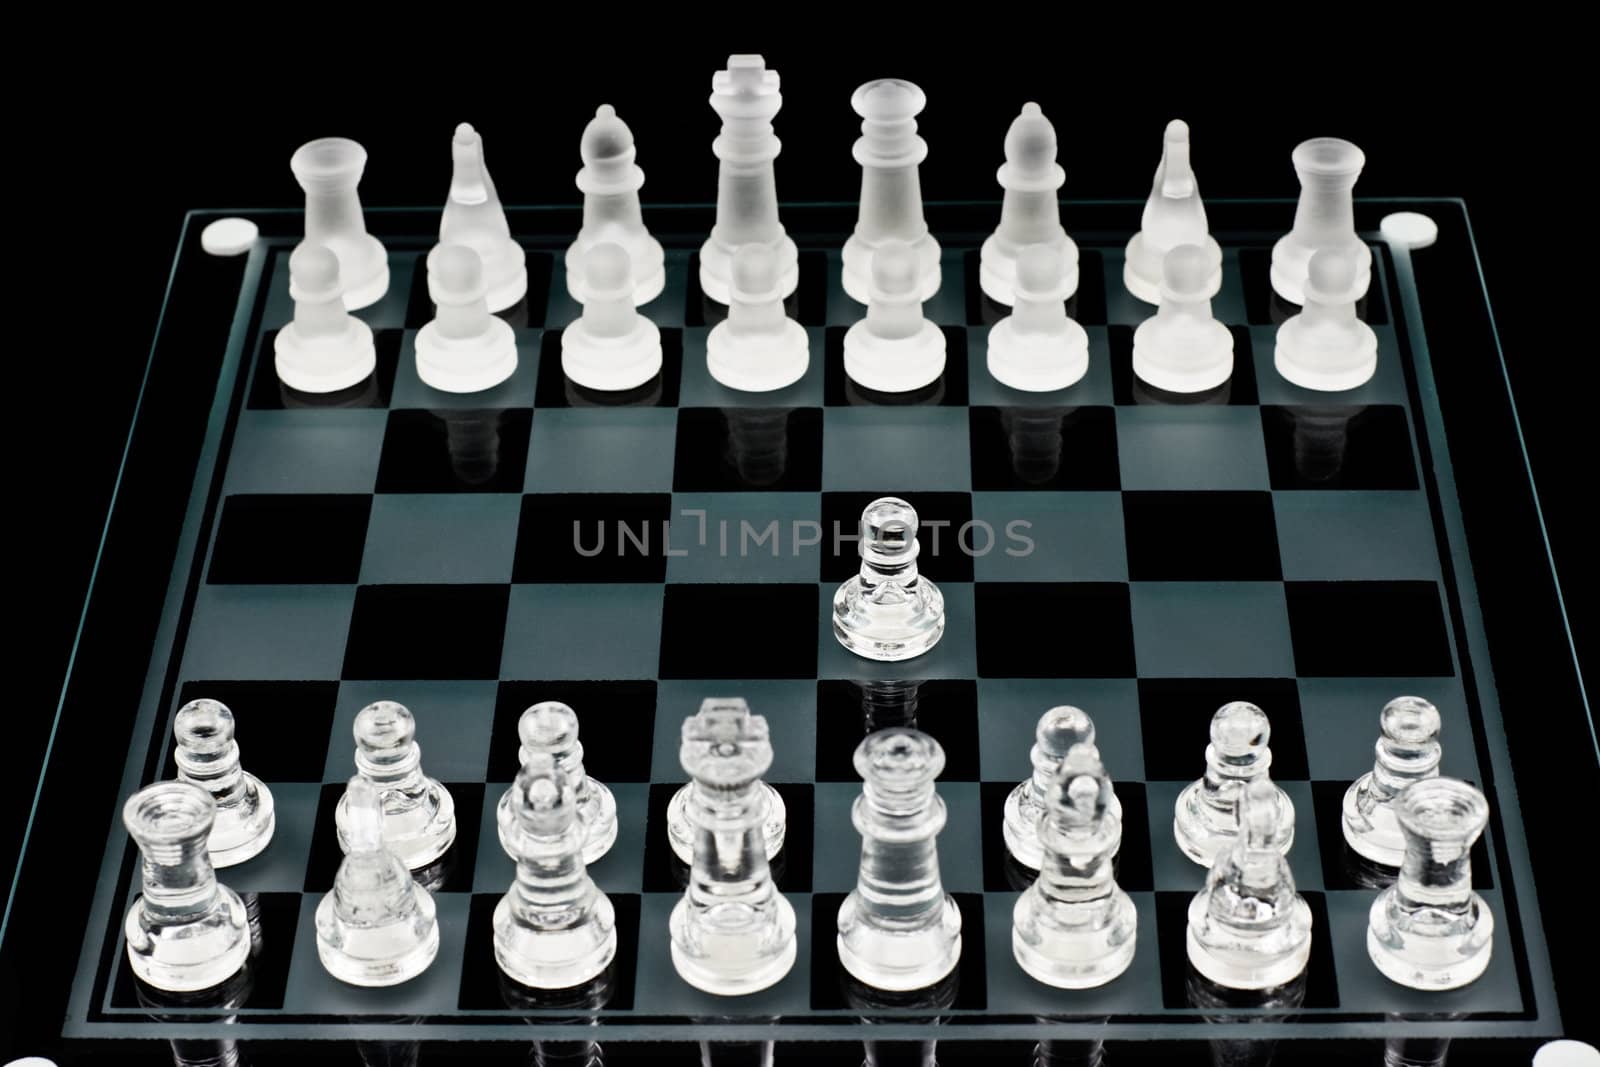 The first move in a chess game